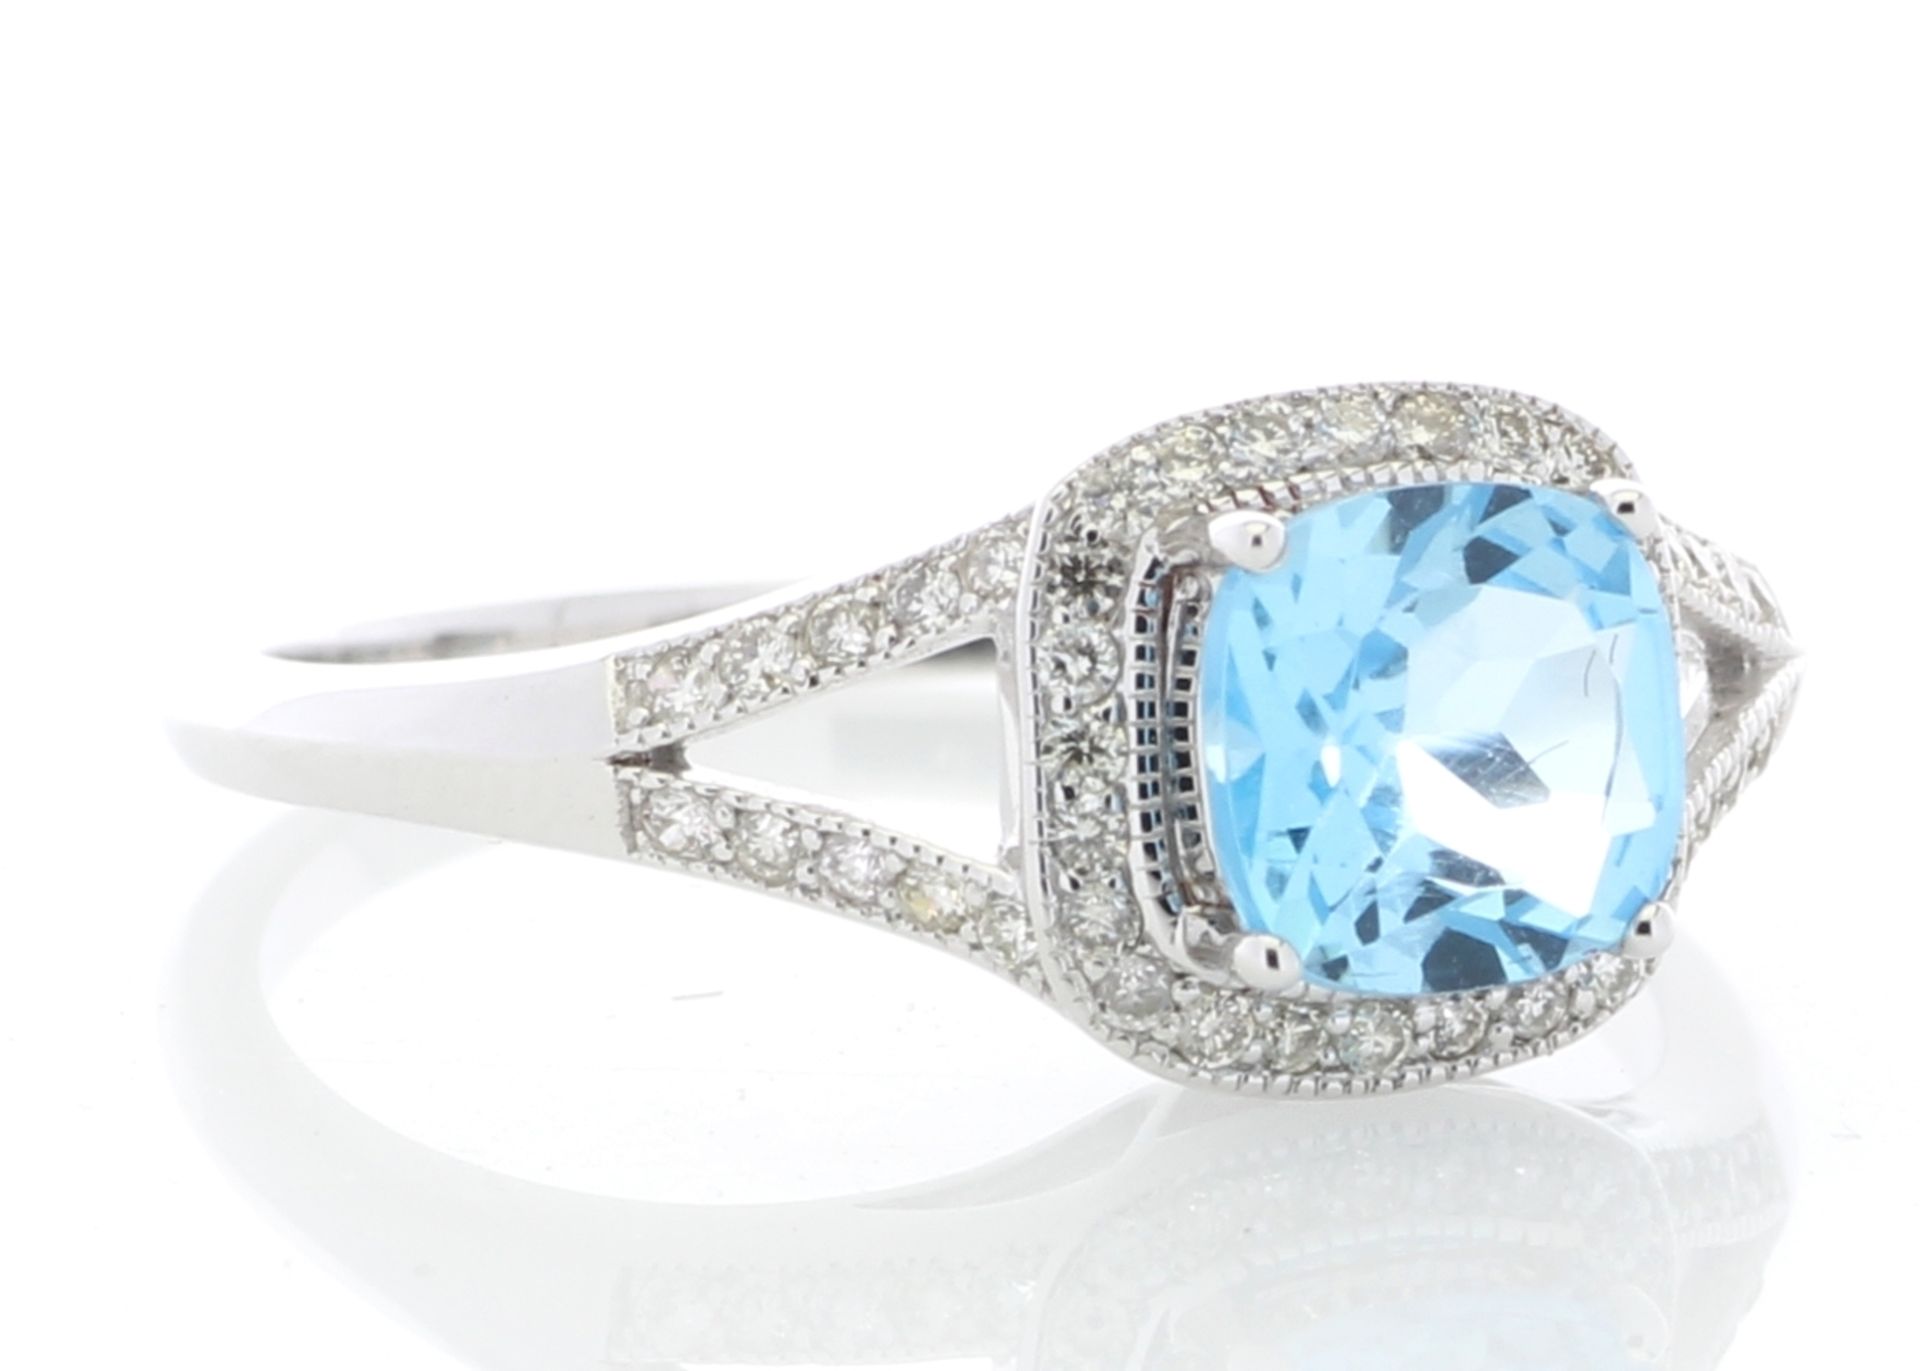 9ct White Gold Blue Topaz And Diamond Ring 0.22 Carats - Valued by GIE £2,695.00 - 9ct White Gold - Image 4 of 5